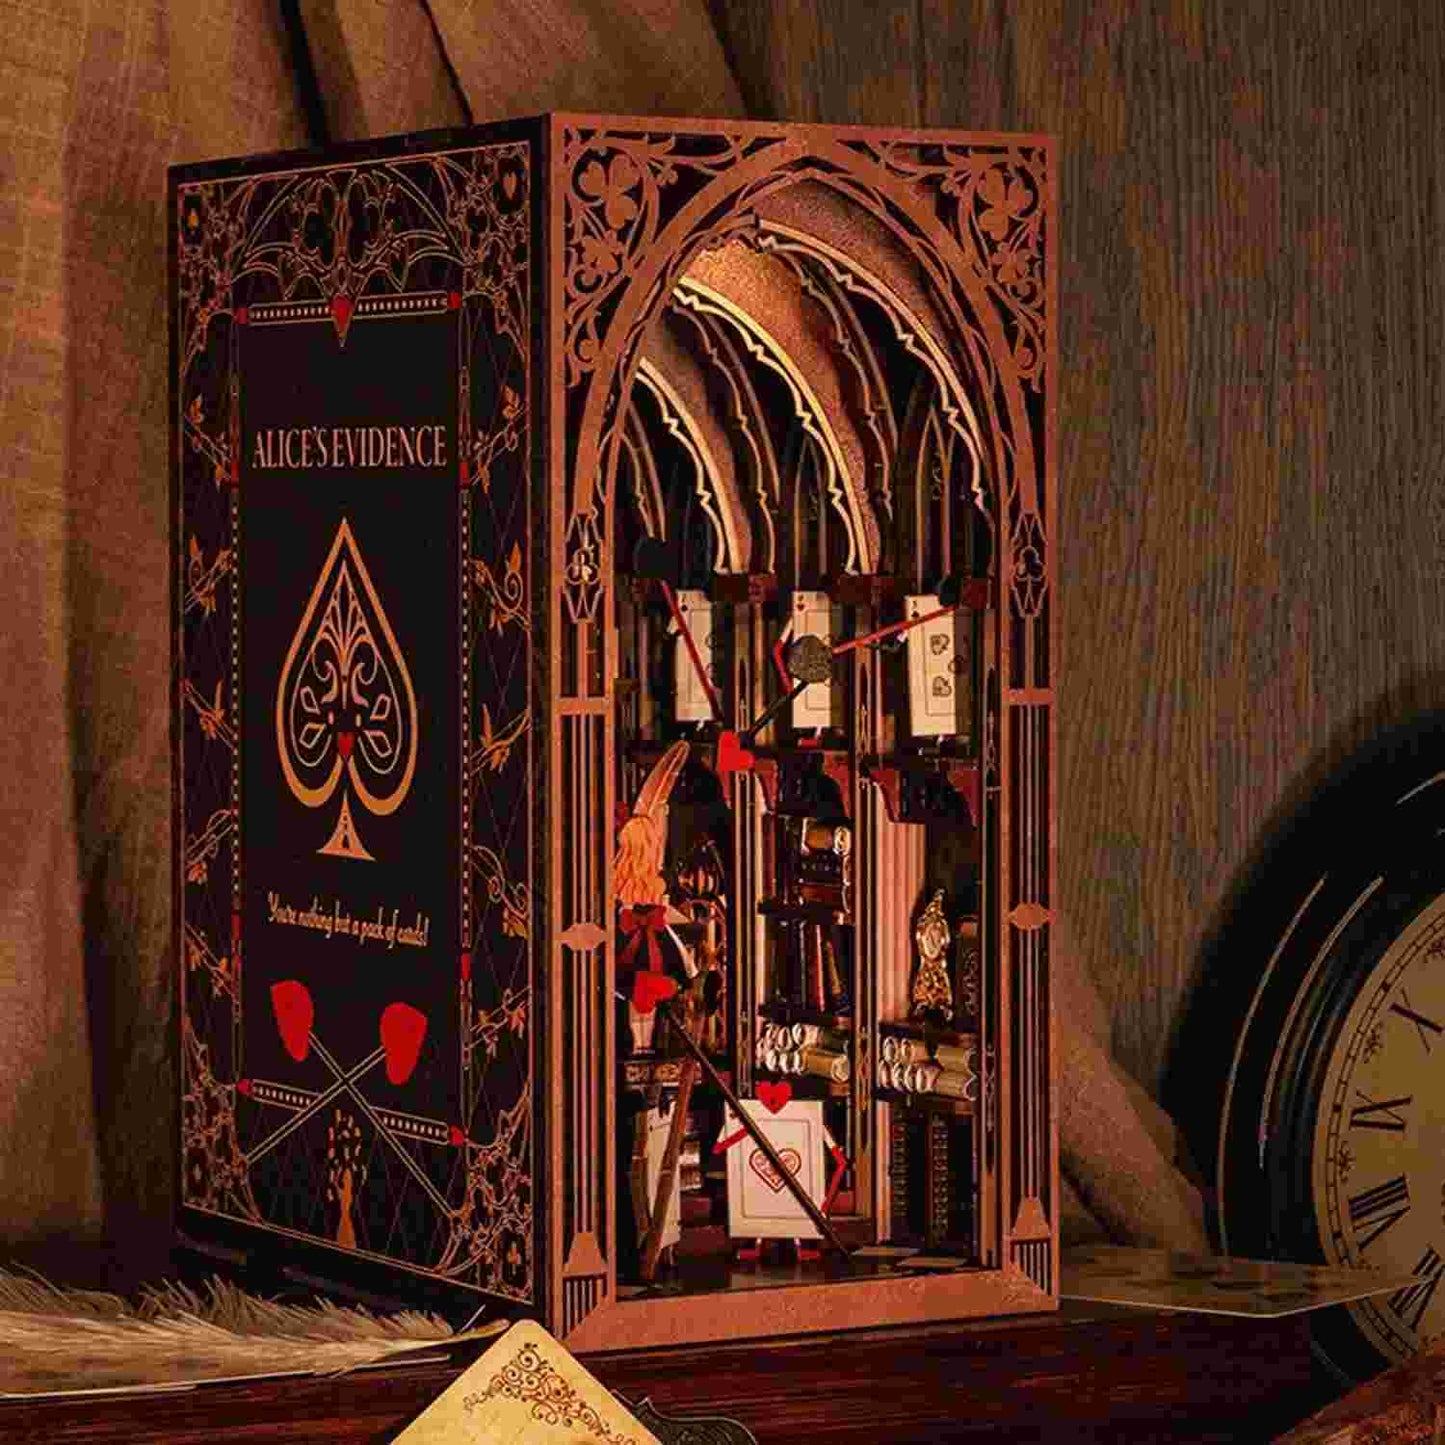 Alice's Evidence DIY book nook kit, inspired by the iconic chapter from "Alice's Adventures in Wonderland.", A charming miniature 3d wooden puzzles relives the charm of this classic tale with authentic miniature scenes., perfect for bookshelf decor, and dollhouse collectors, or a gift for wonderland fans.